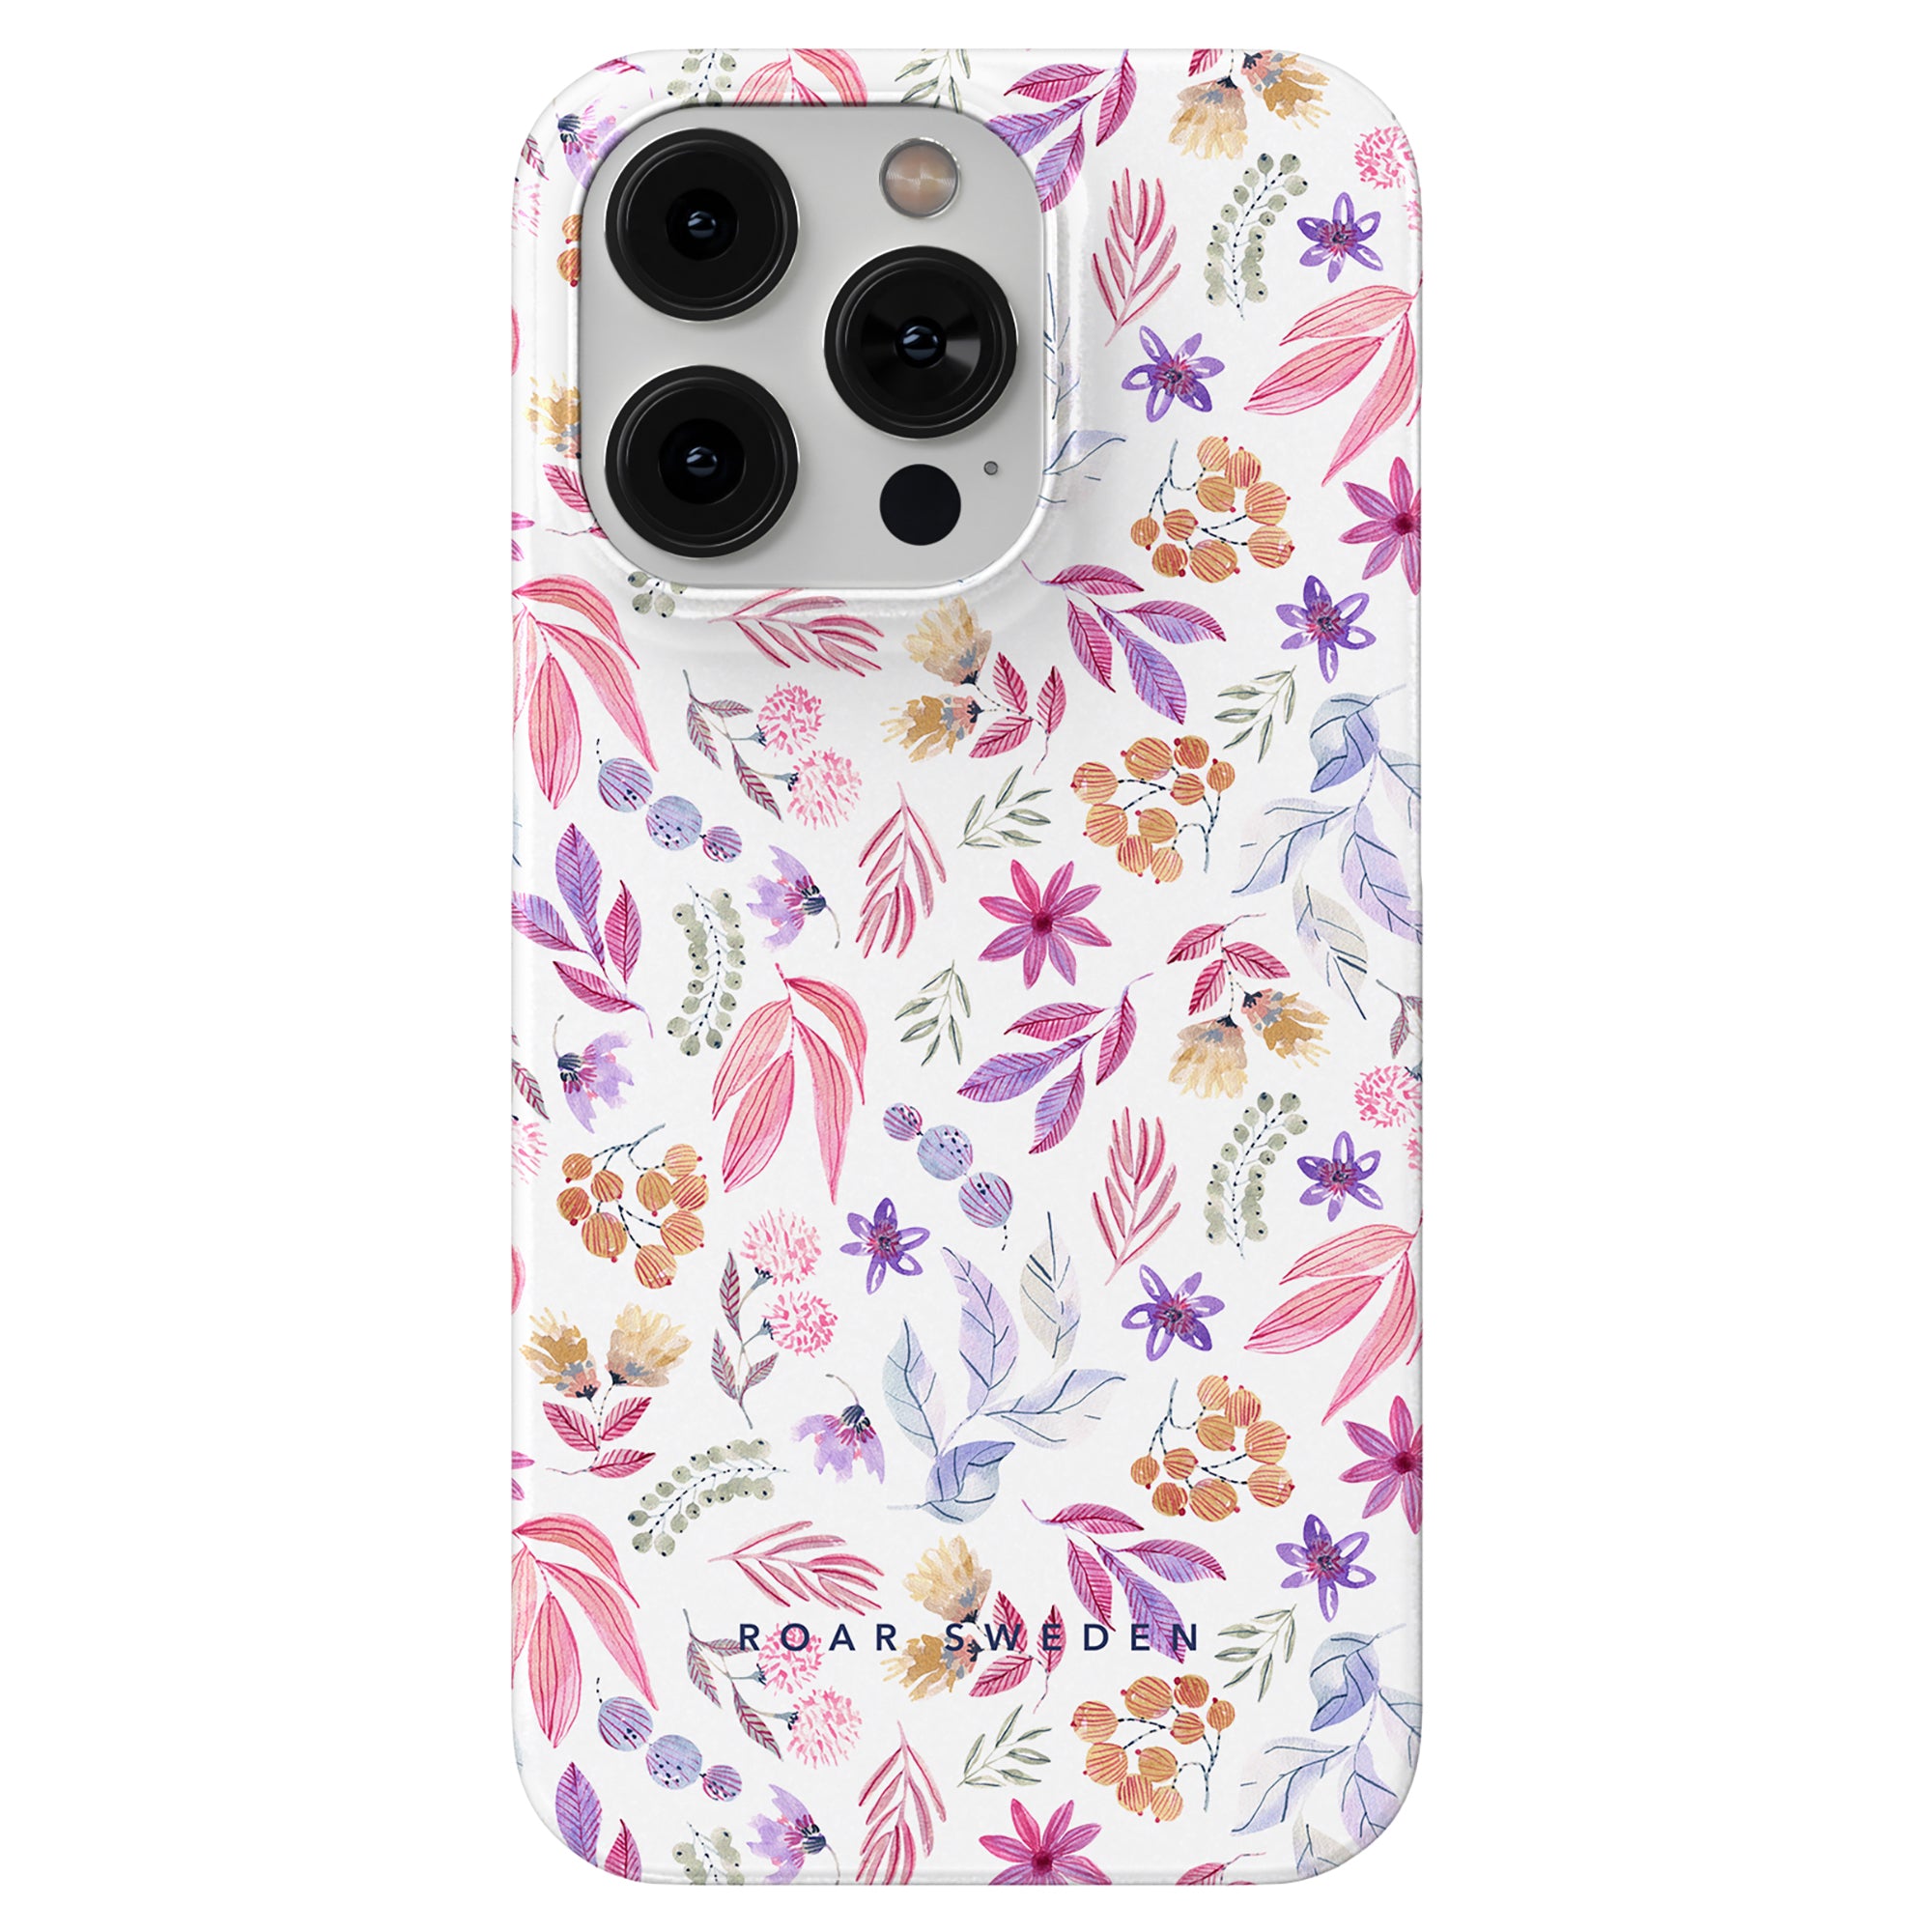 A smartphone with a floral-patterned mobilskal featuring pink, purple, and orange flowers. This Flower Power - Slim case from the Floral Collection proudly displays "ROAR SWEDEN" at the bottom.